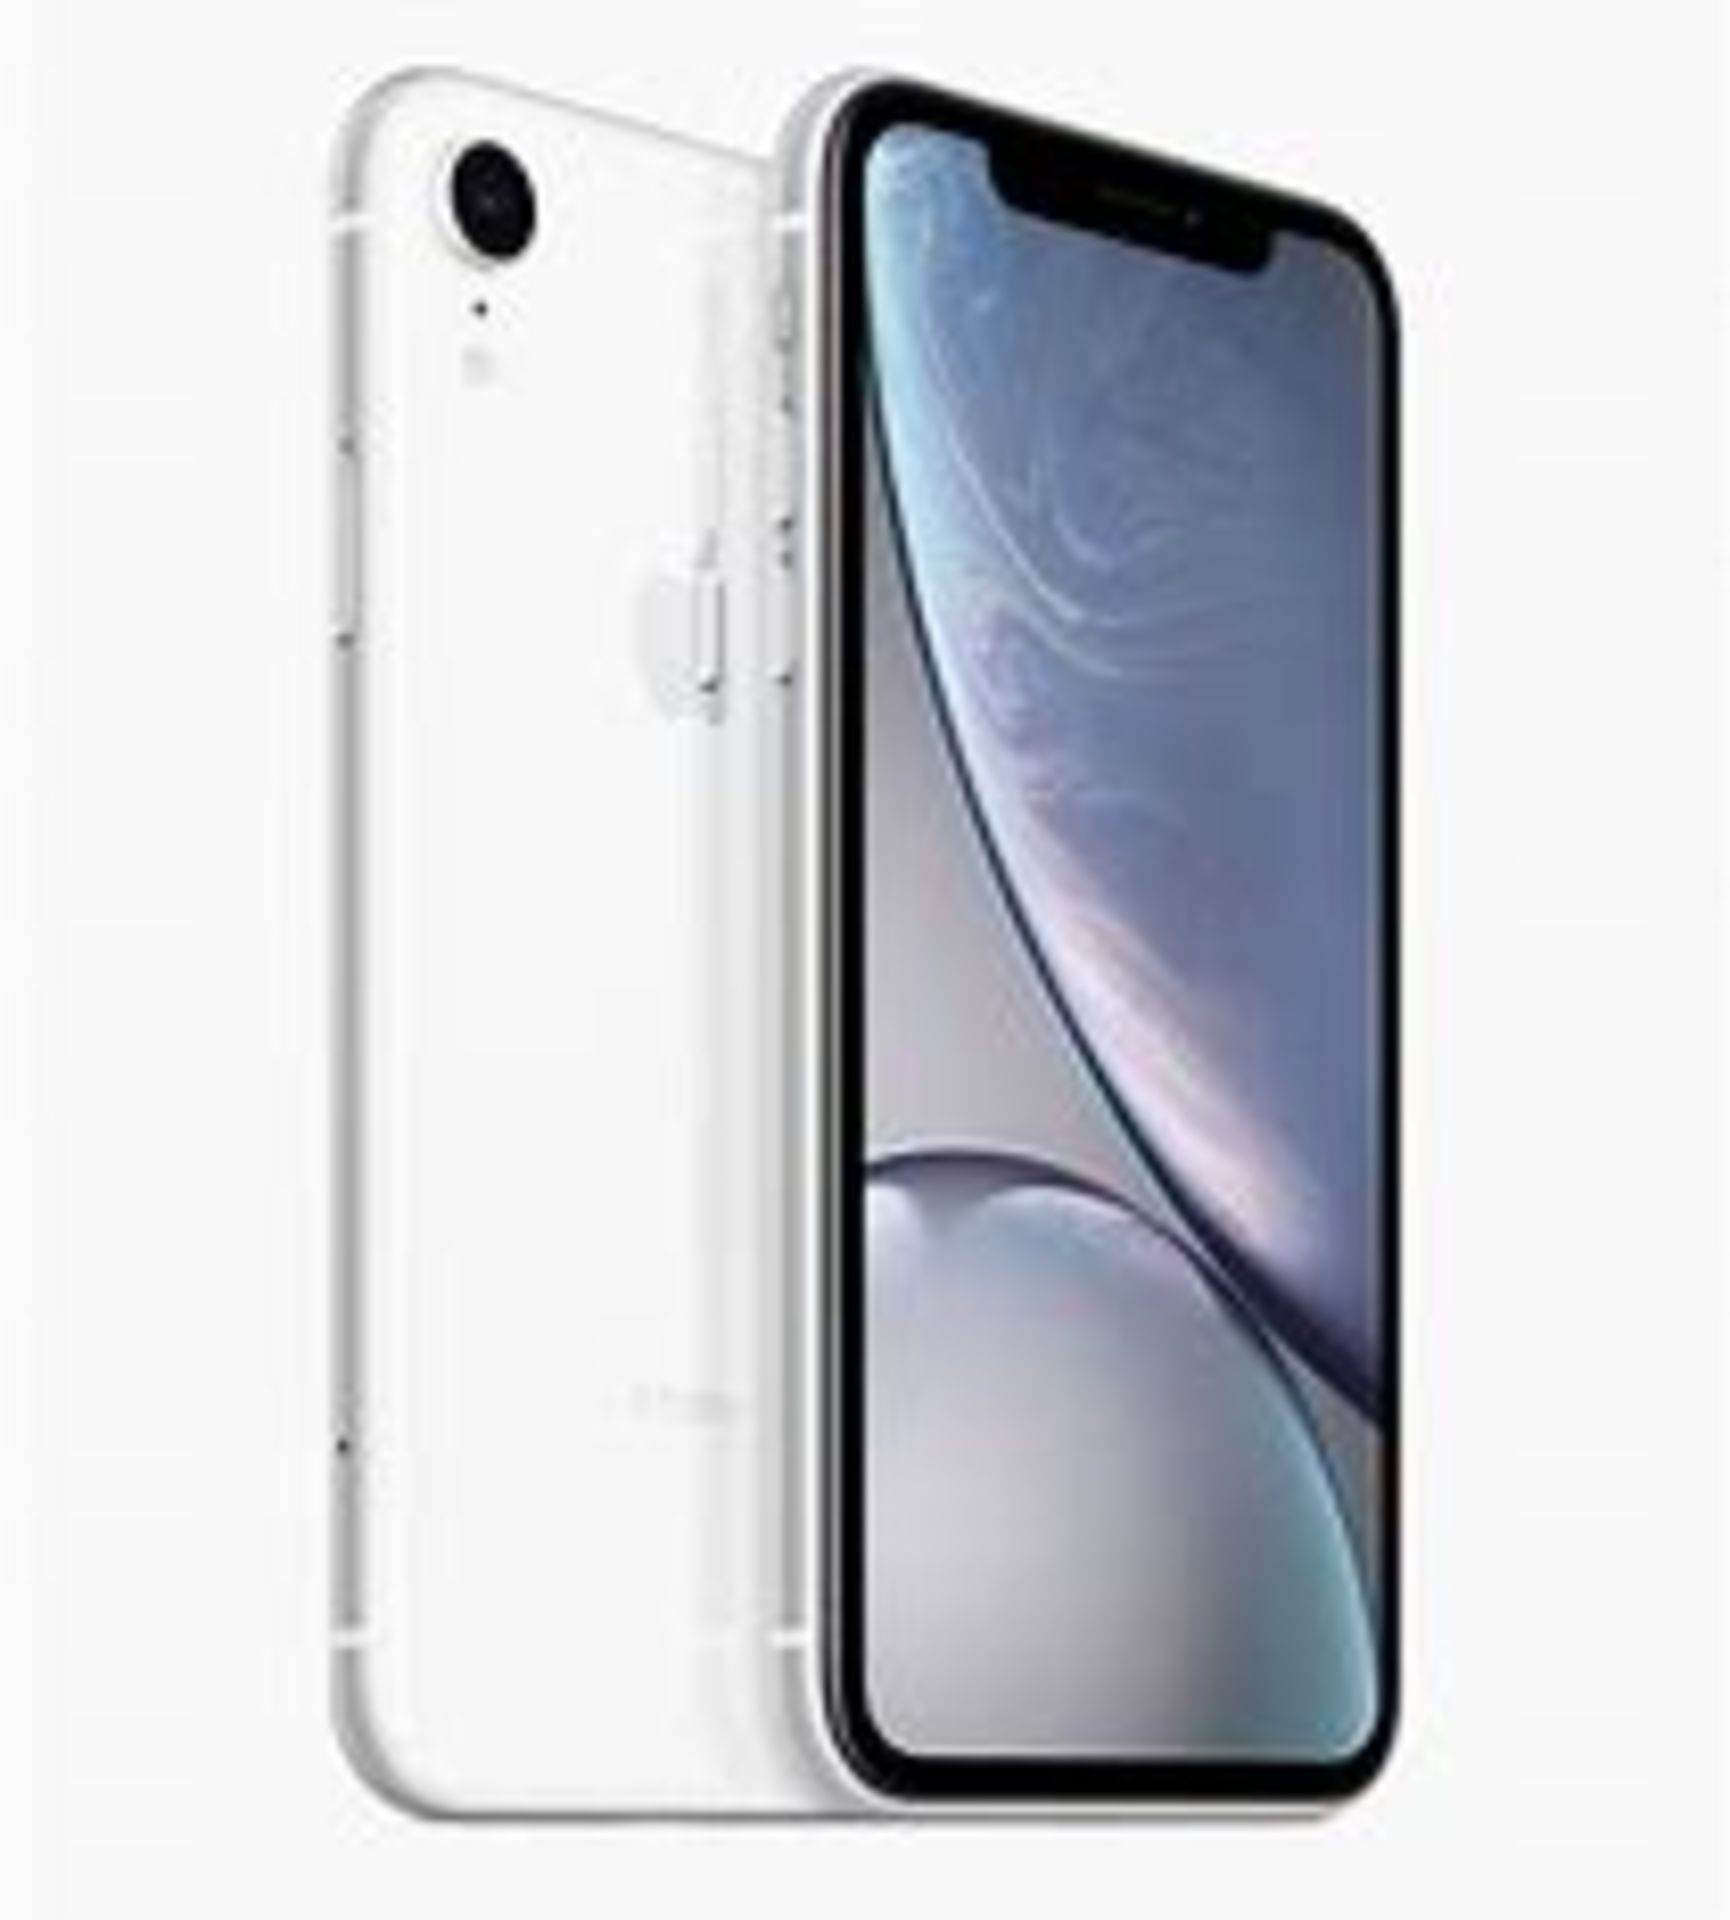 Apple iPhone XR 64GB White. RRP £630 - Grade A - Perfect Working Condition - (Fully refurbished